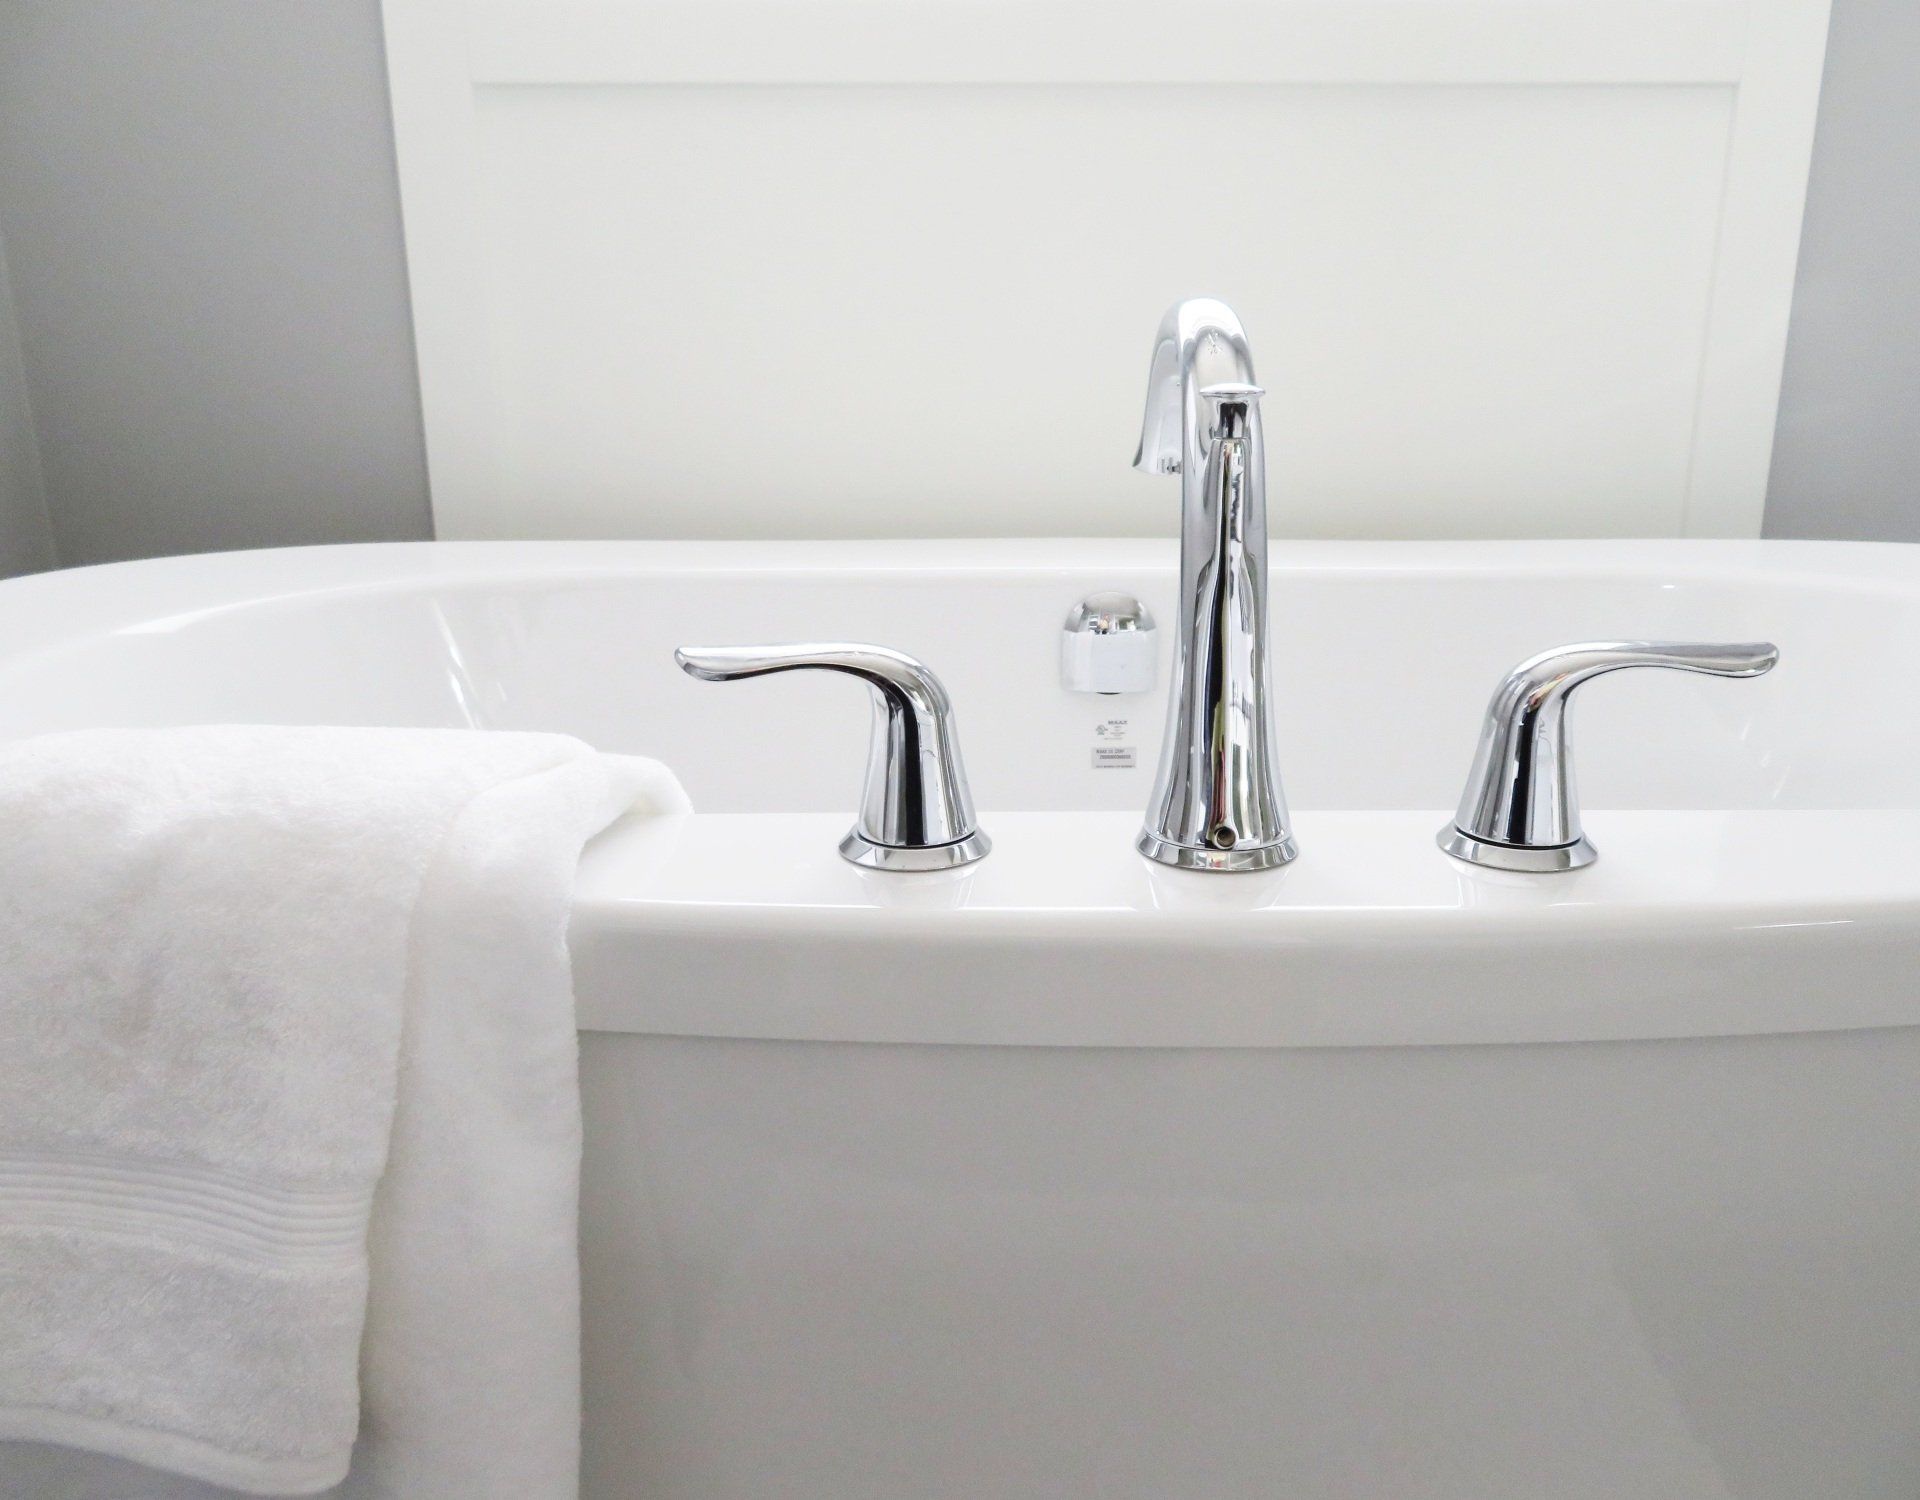 How to Choose the Right Faucet and Fixtures for Your Bathroom